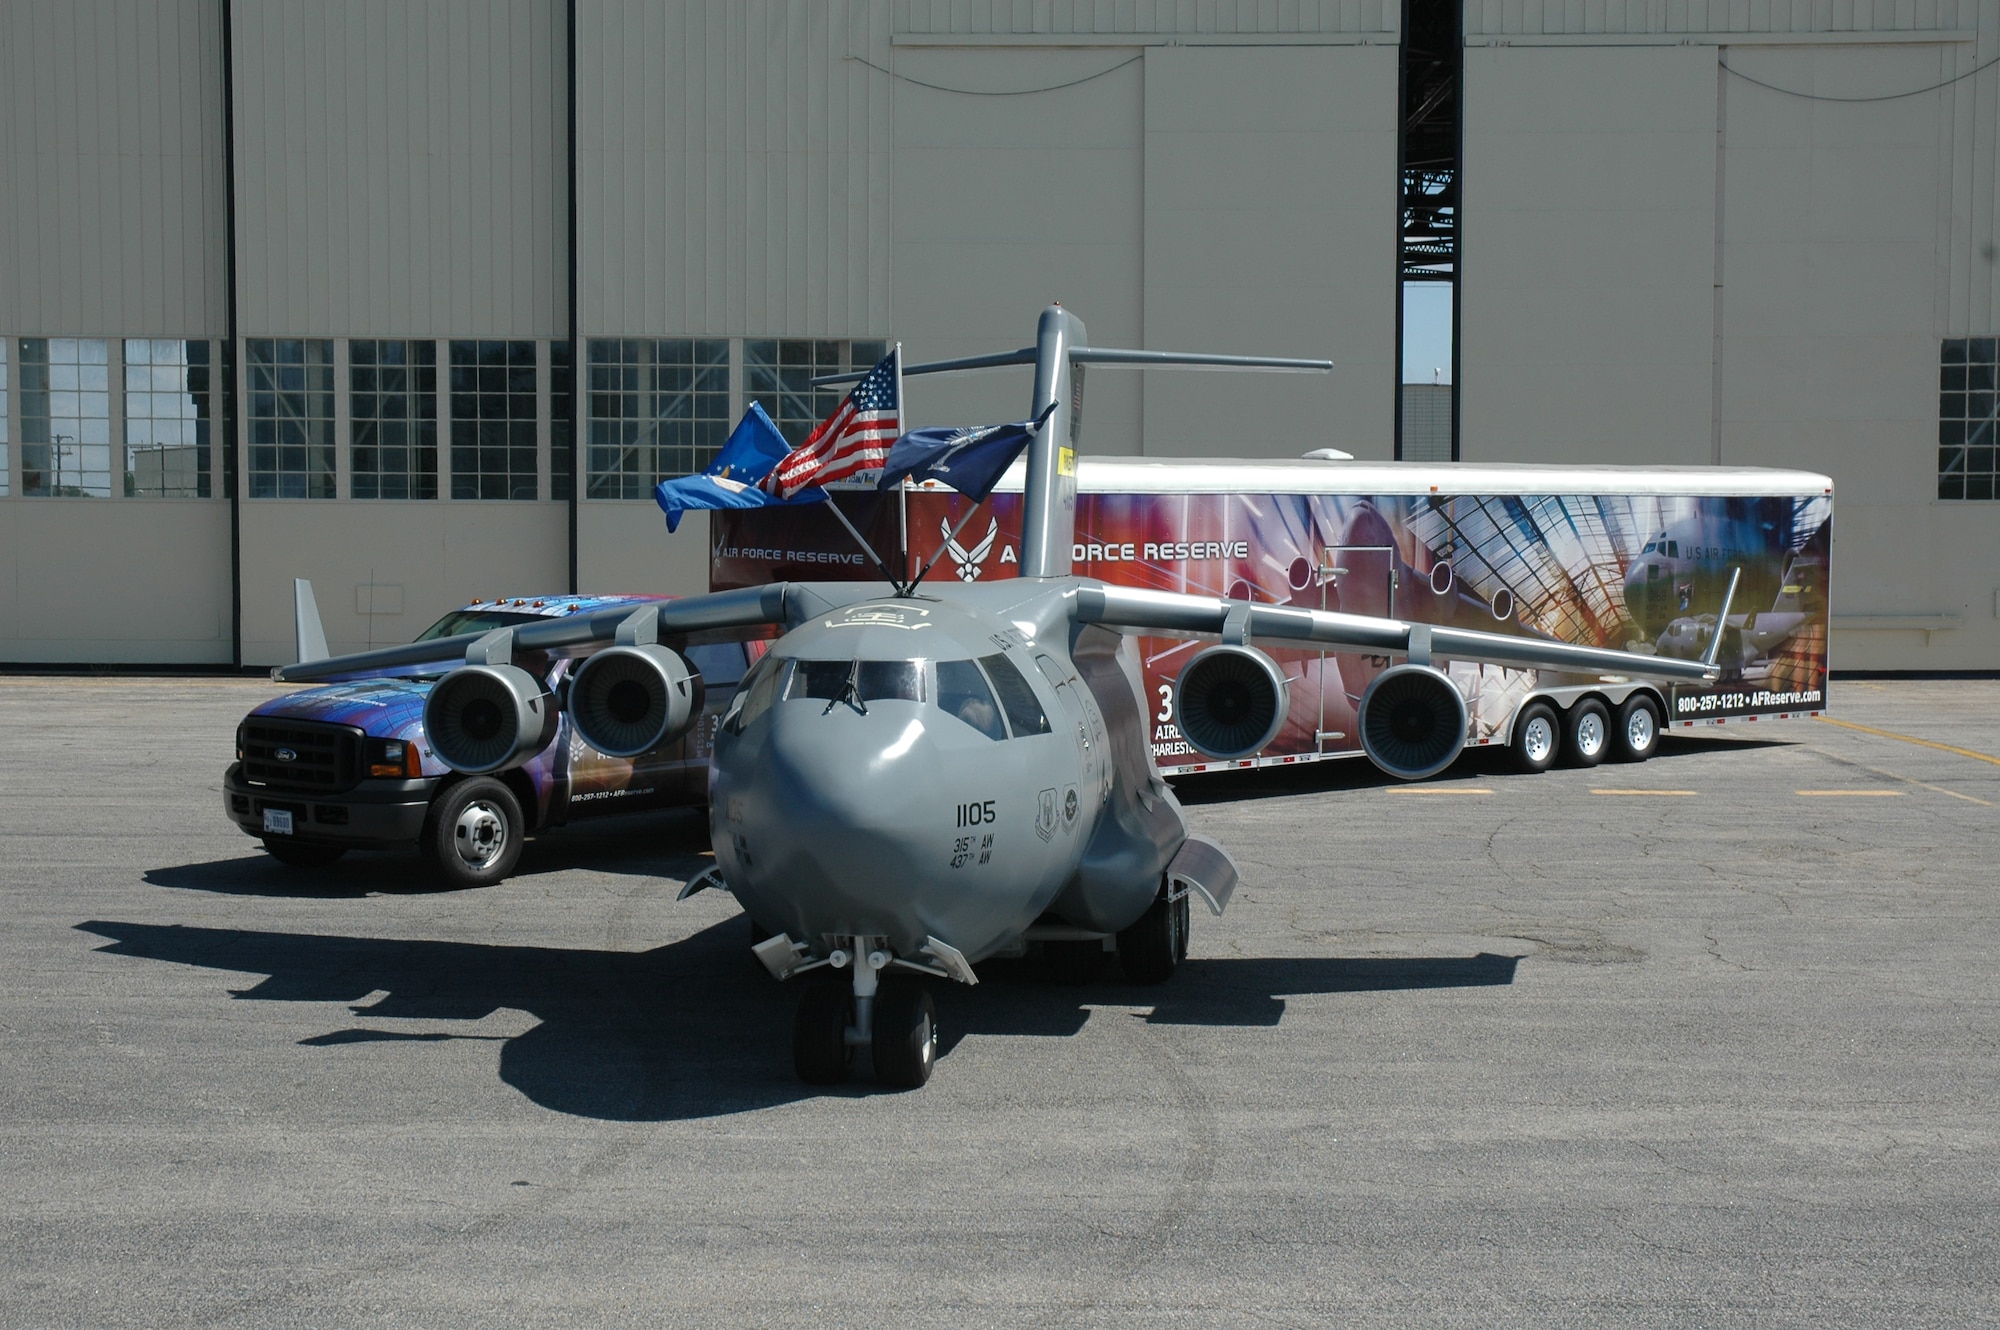 Charleston AFB's miniature C-17 replica, the Spirit of Hope, Liberty and Freedom, in front of its trailer with new graphics provided by the AFRC's Recruiting Service.  The miniature C-17 will travel around the country and be used as a community outreach and recruiting tool.  (Photo by Capt. Wayne Capps)